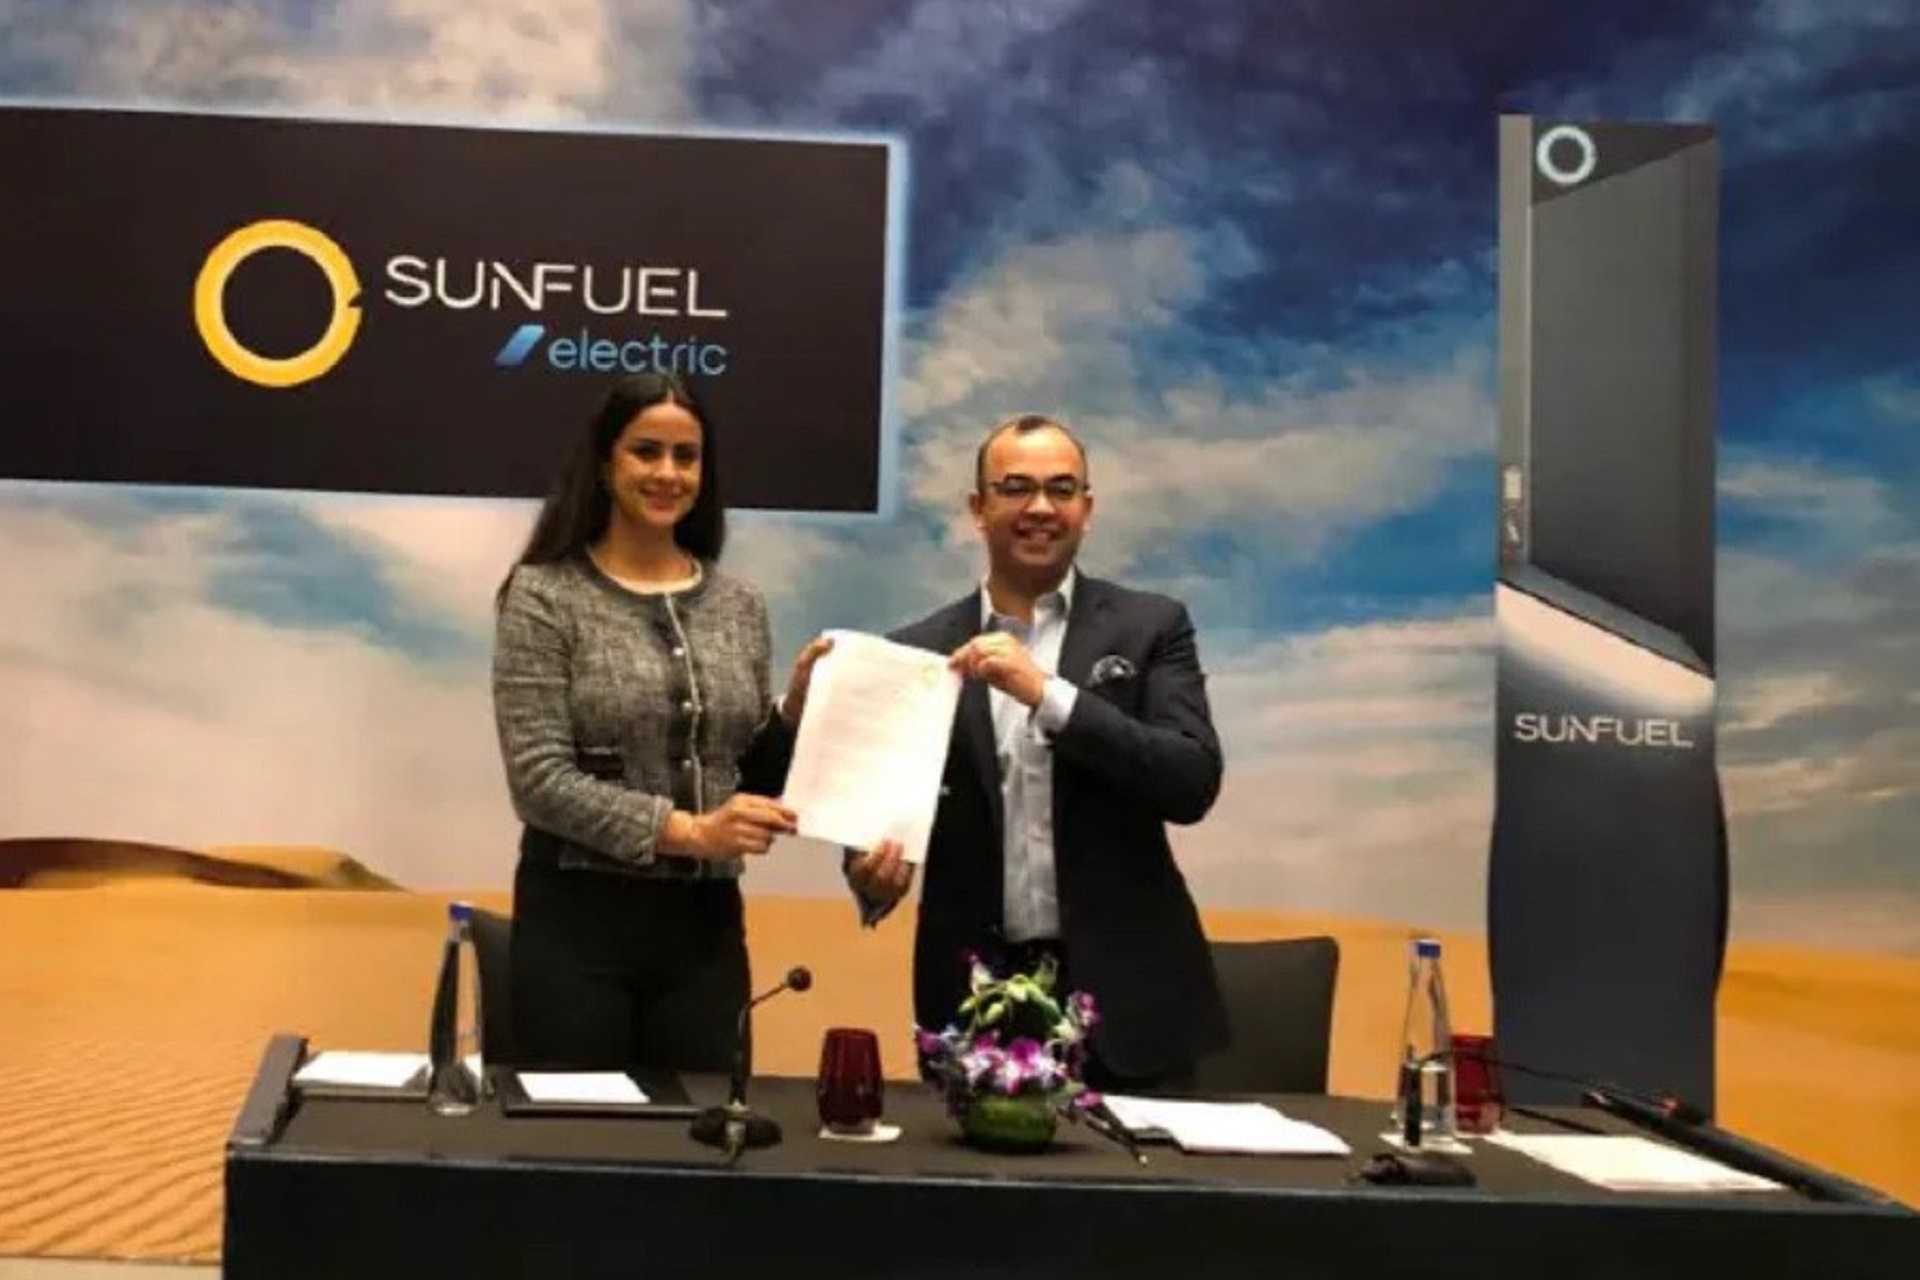 These Hotel Chains Have Partnered With SunFuel Electric To Provide EV Charging Stations